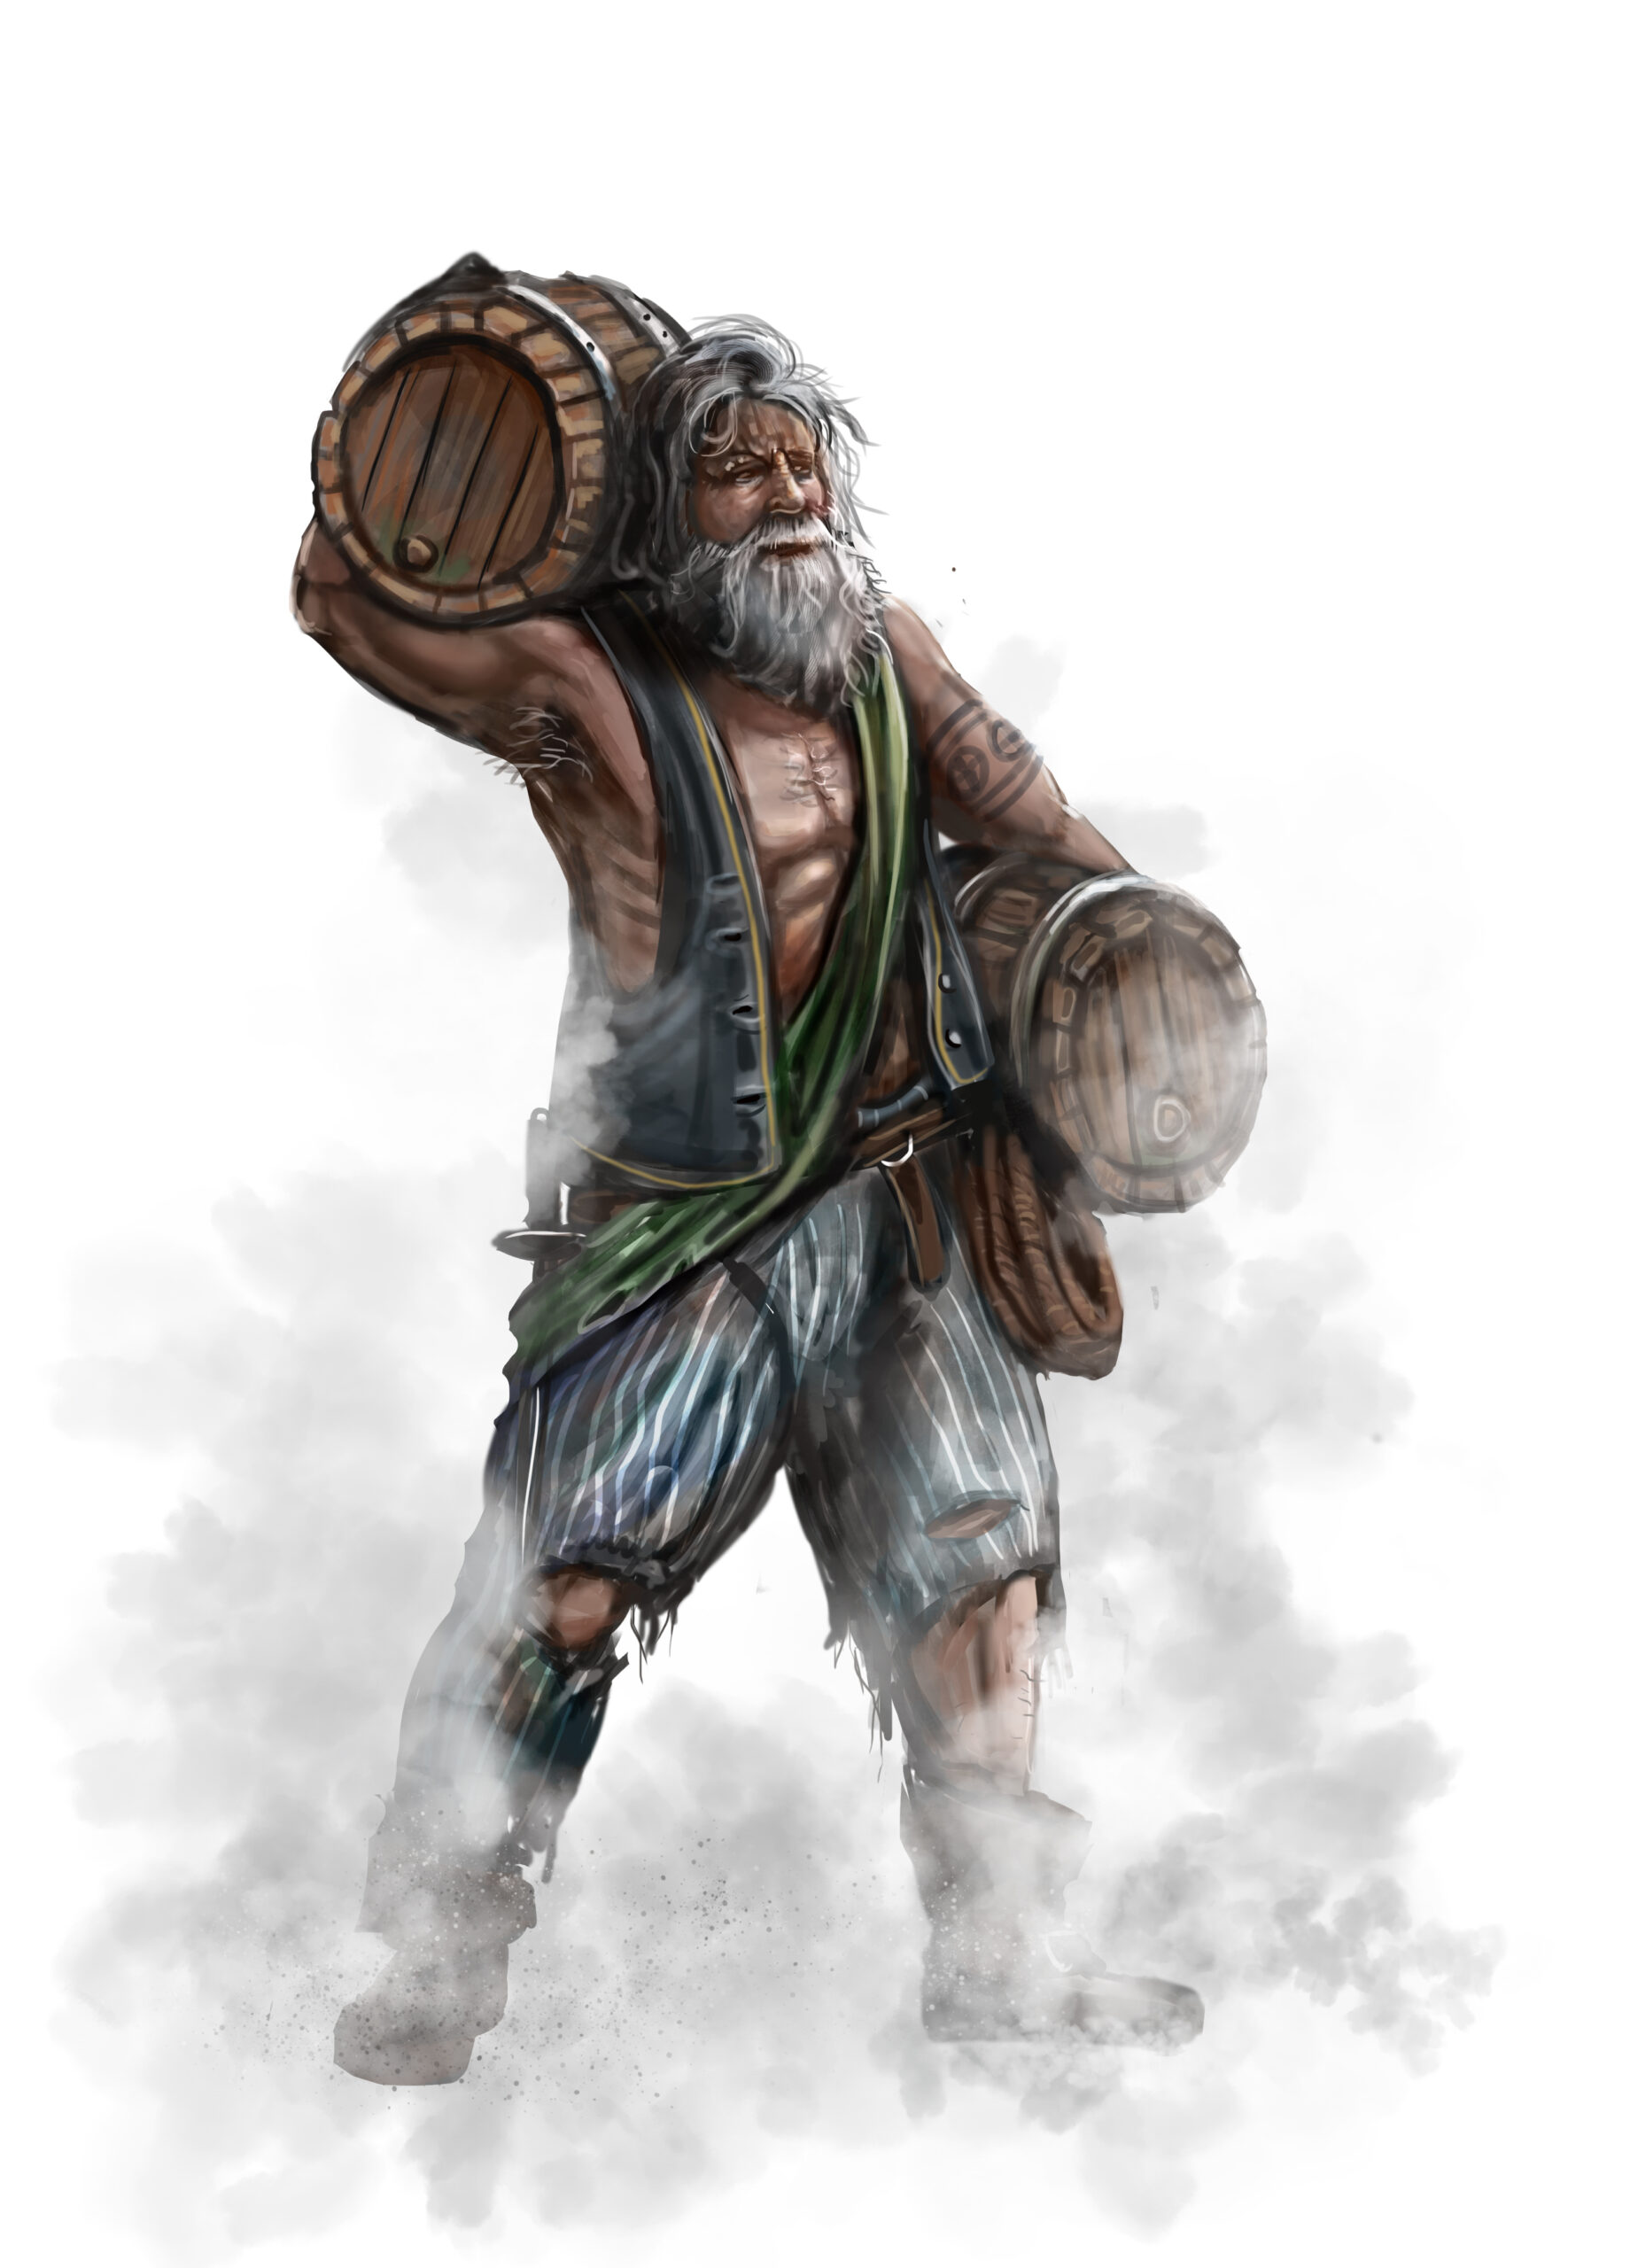 Male pirate with barrels, old pirate. Character art by board game artist, the noble artist